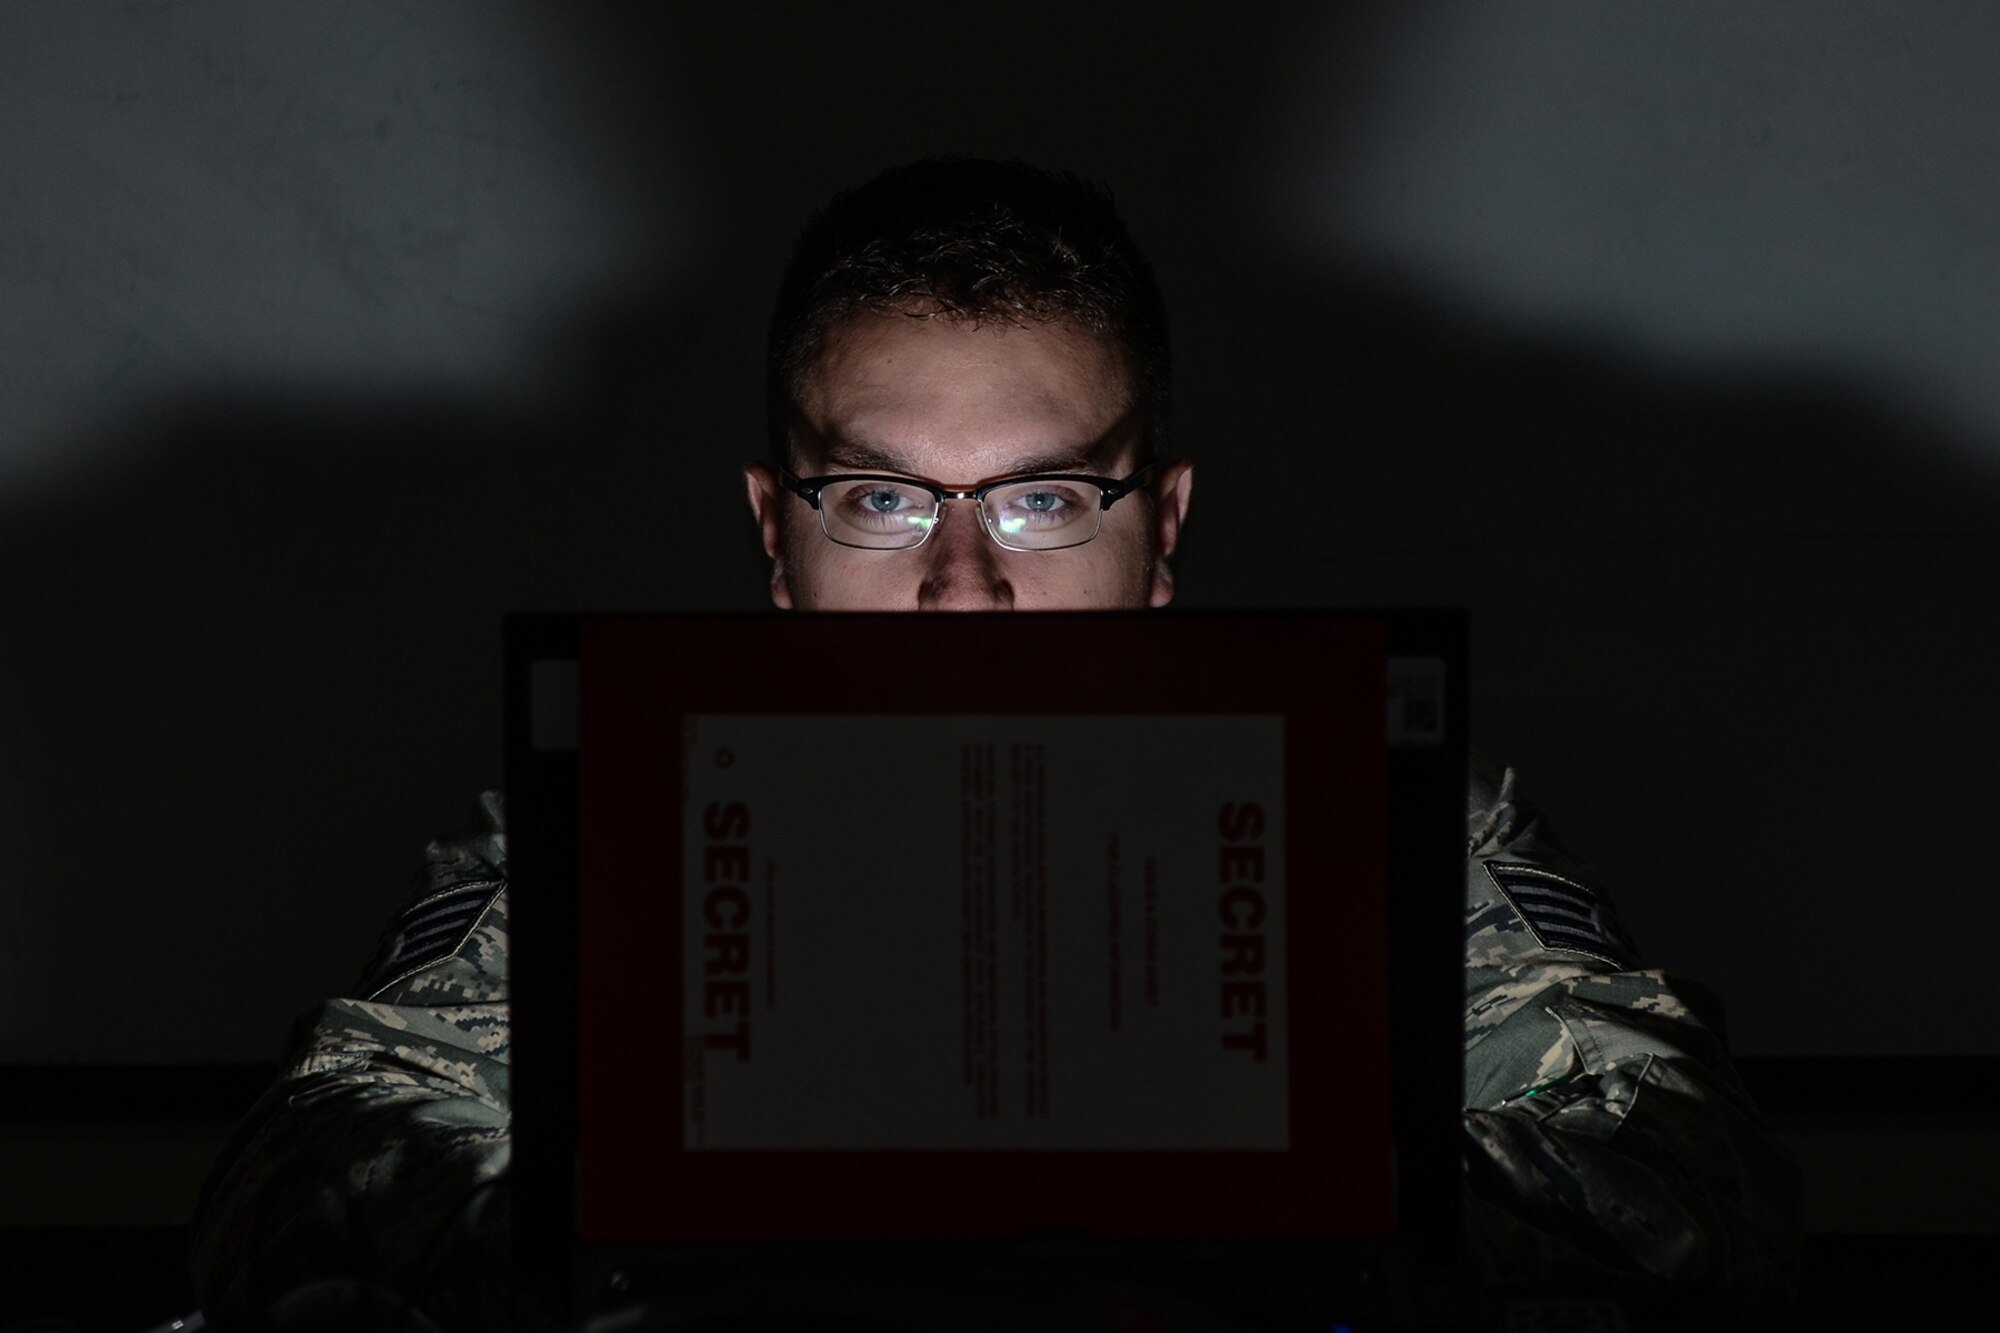 U.S. Air Force Staff Sgt. Kyle Baker, active associate Intel analyst with the 169th Operations Support Squadron, views a computer screen at McEntire Joint National Guard Base, S.C. June 14, 2015.  
(S.C. Air National Guard photo by Tech. Sgt. Jorge Intriago/RELEASED)